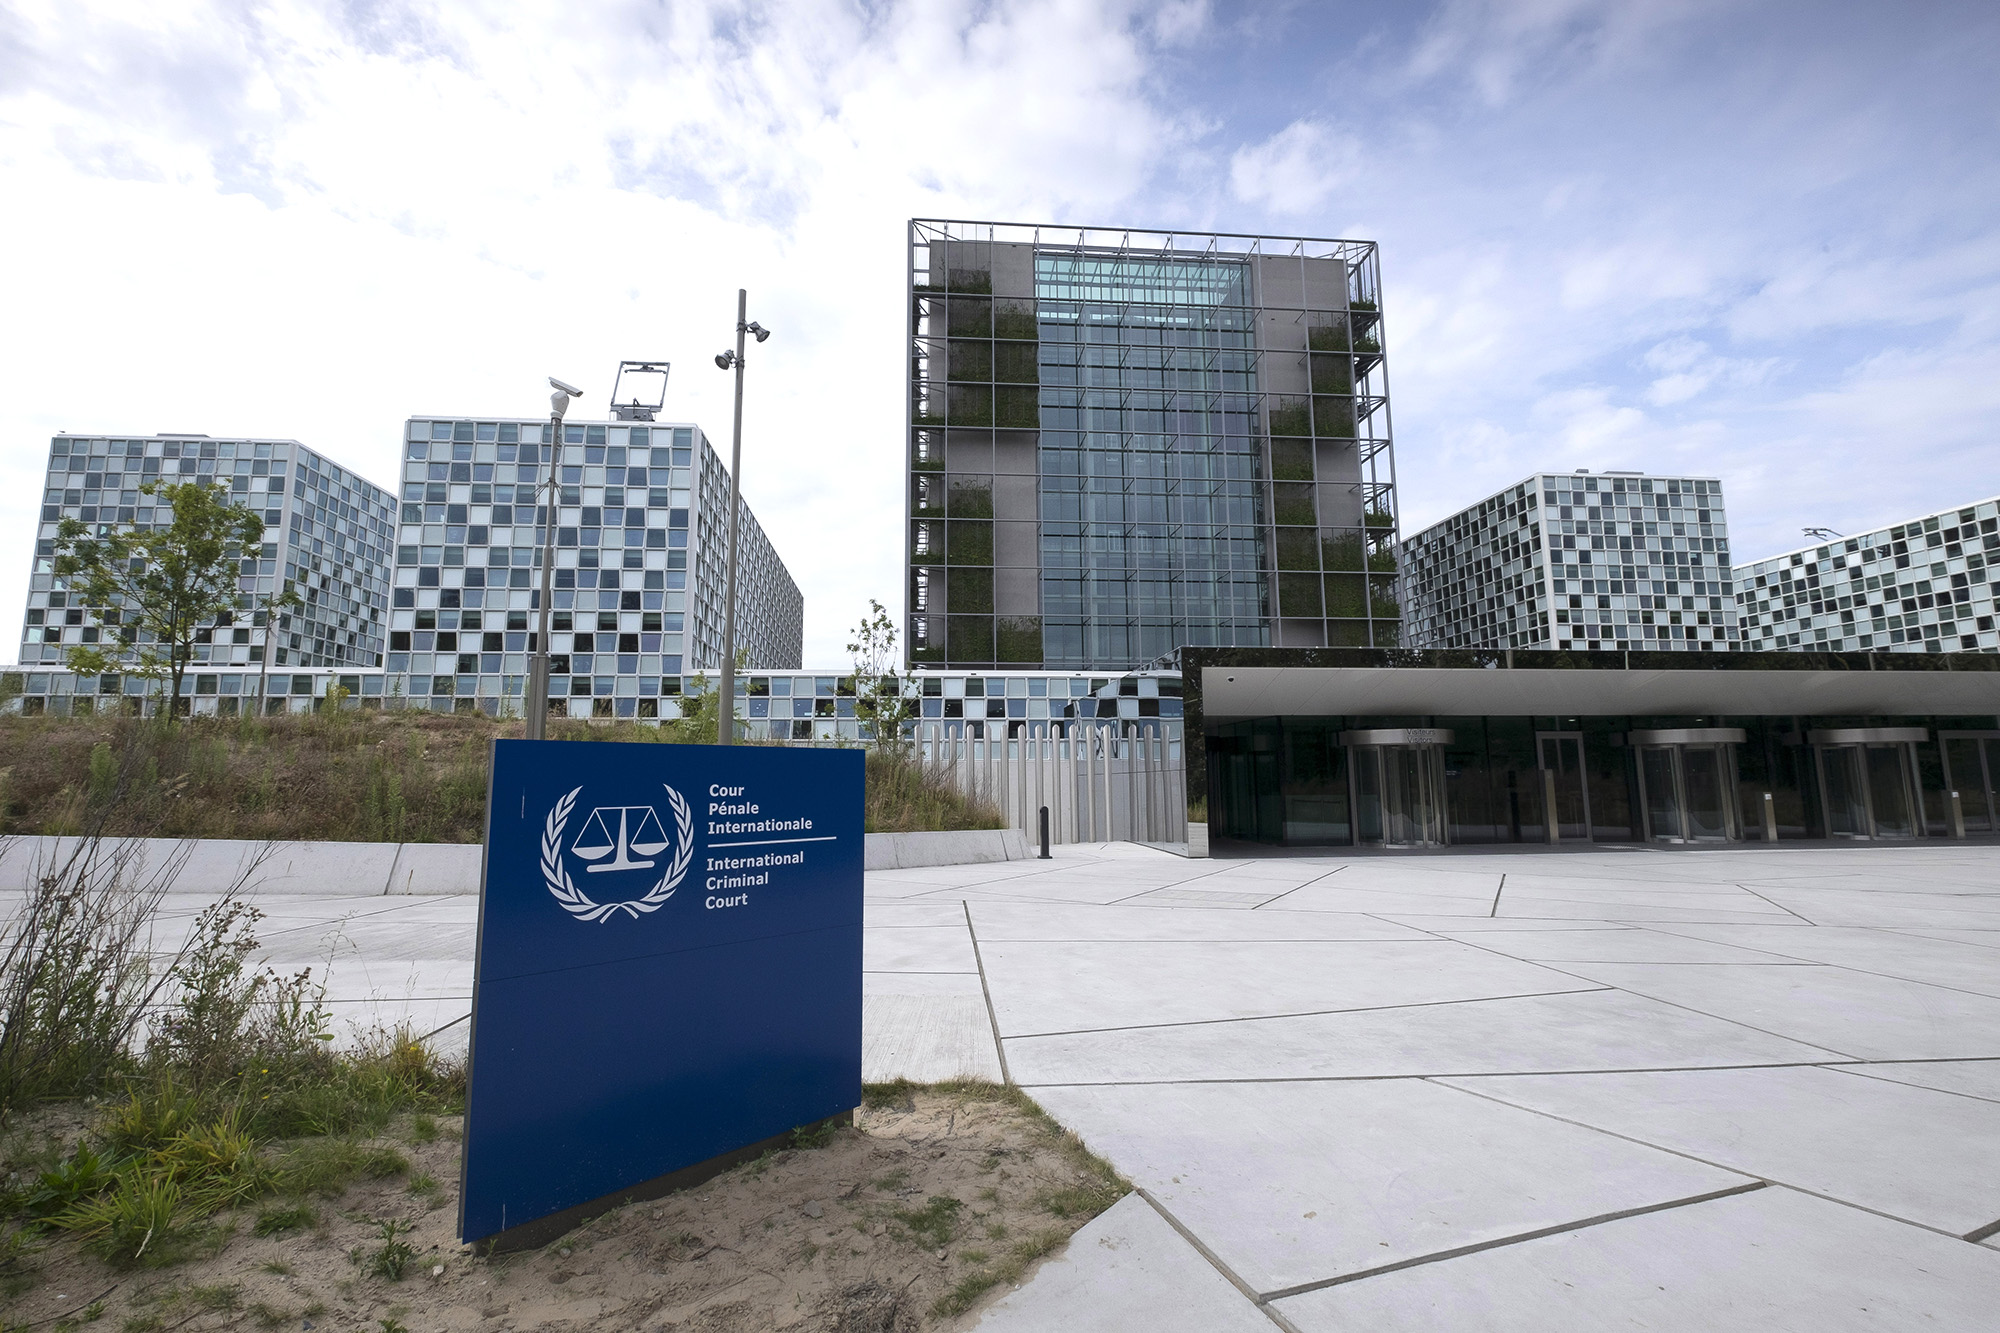 The International Criminal Court building in The Hague, Netherlands on July 30, 2016.